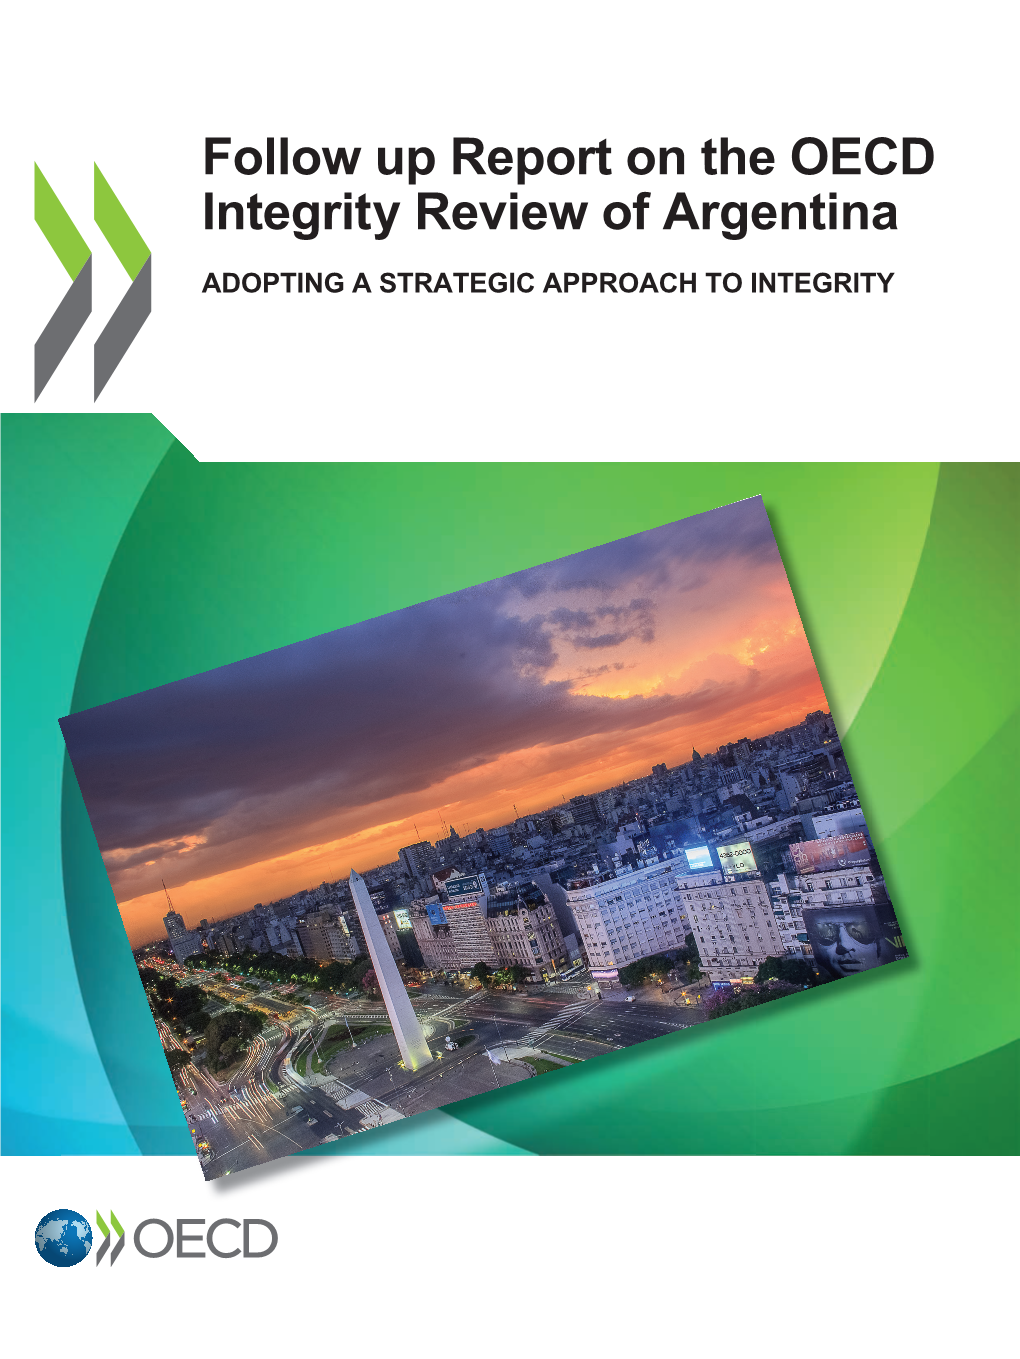 Follow up Report on the OECD Integrity Review of Argentina